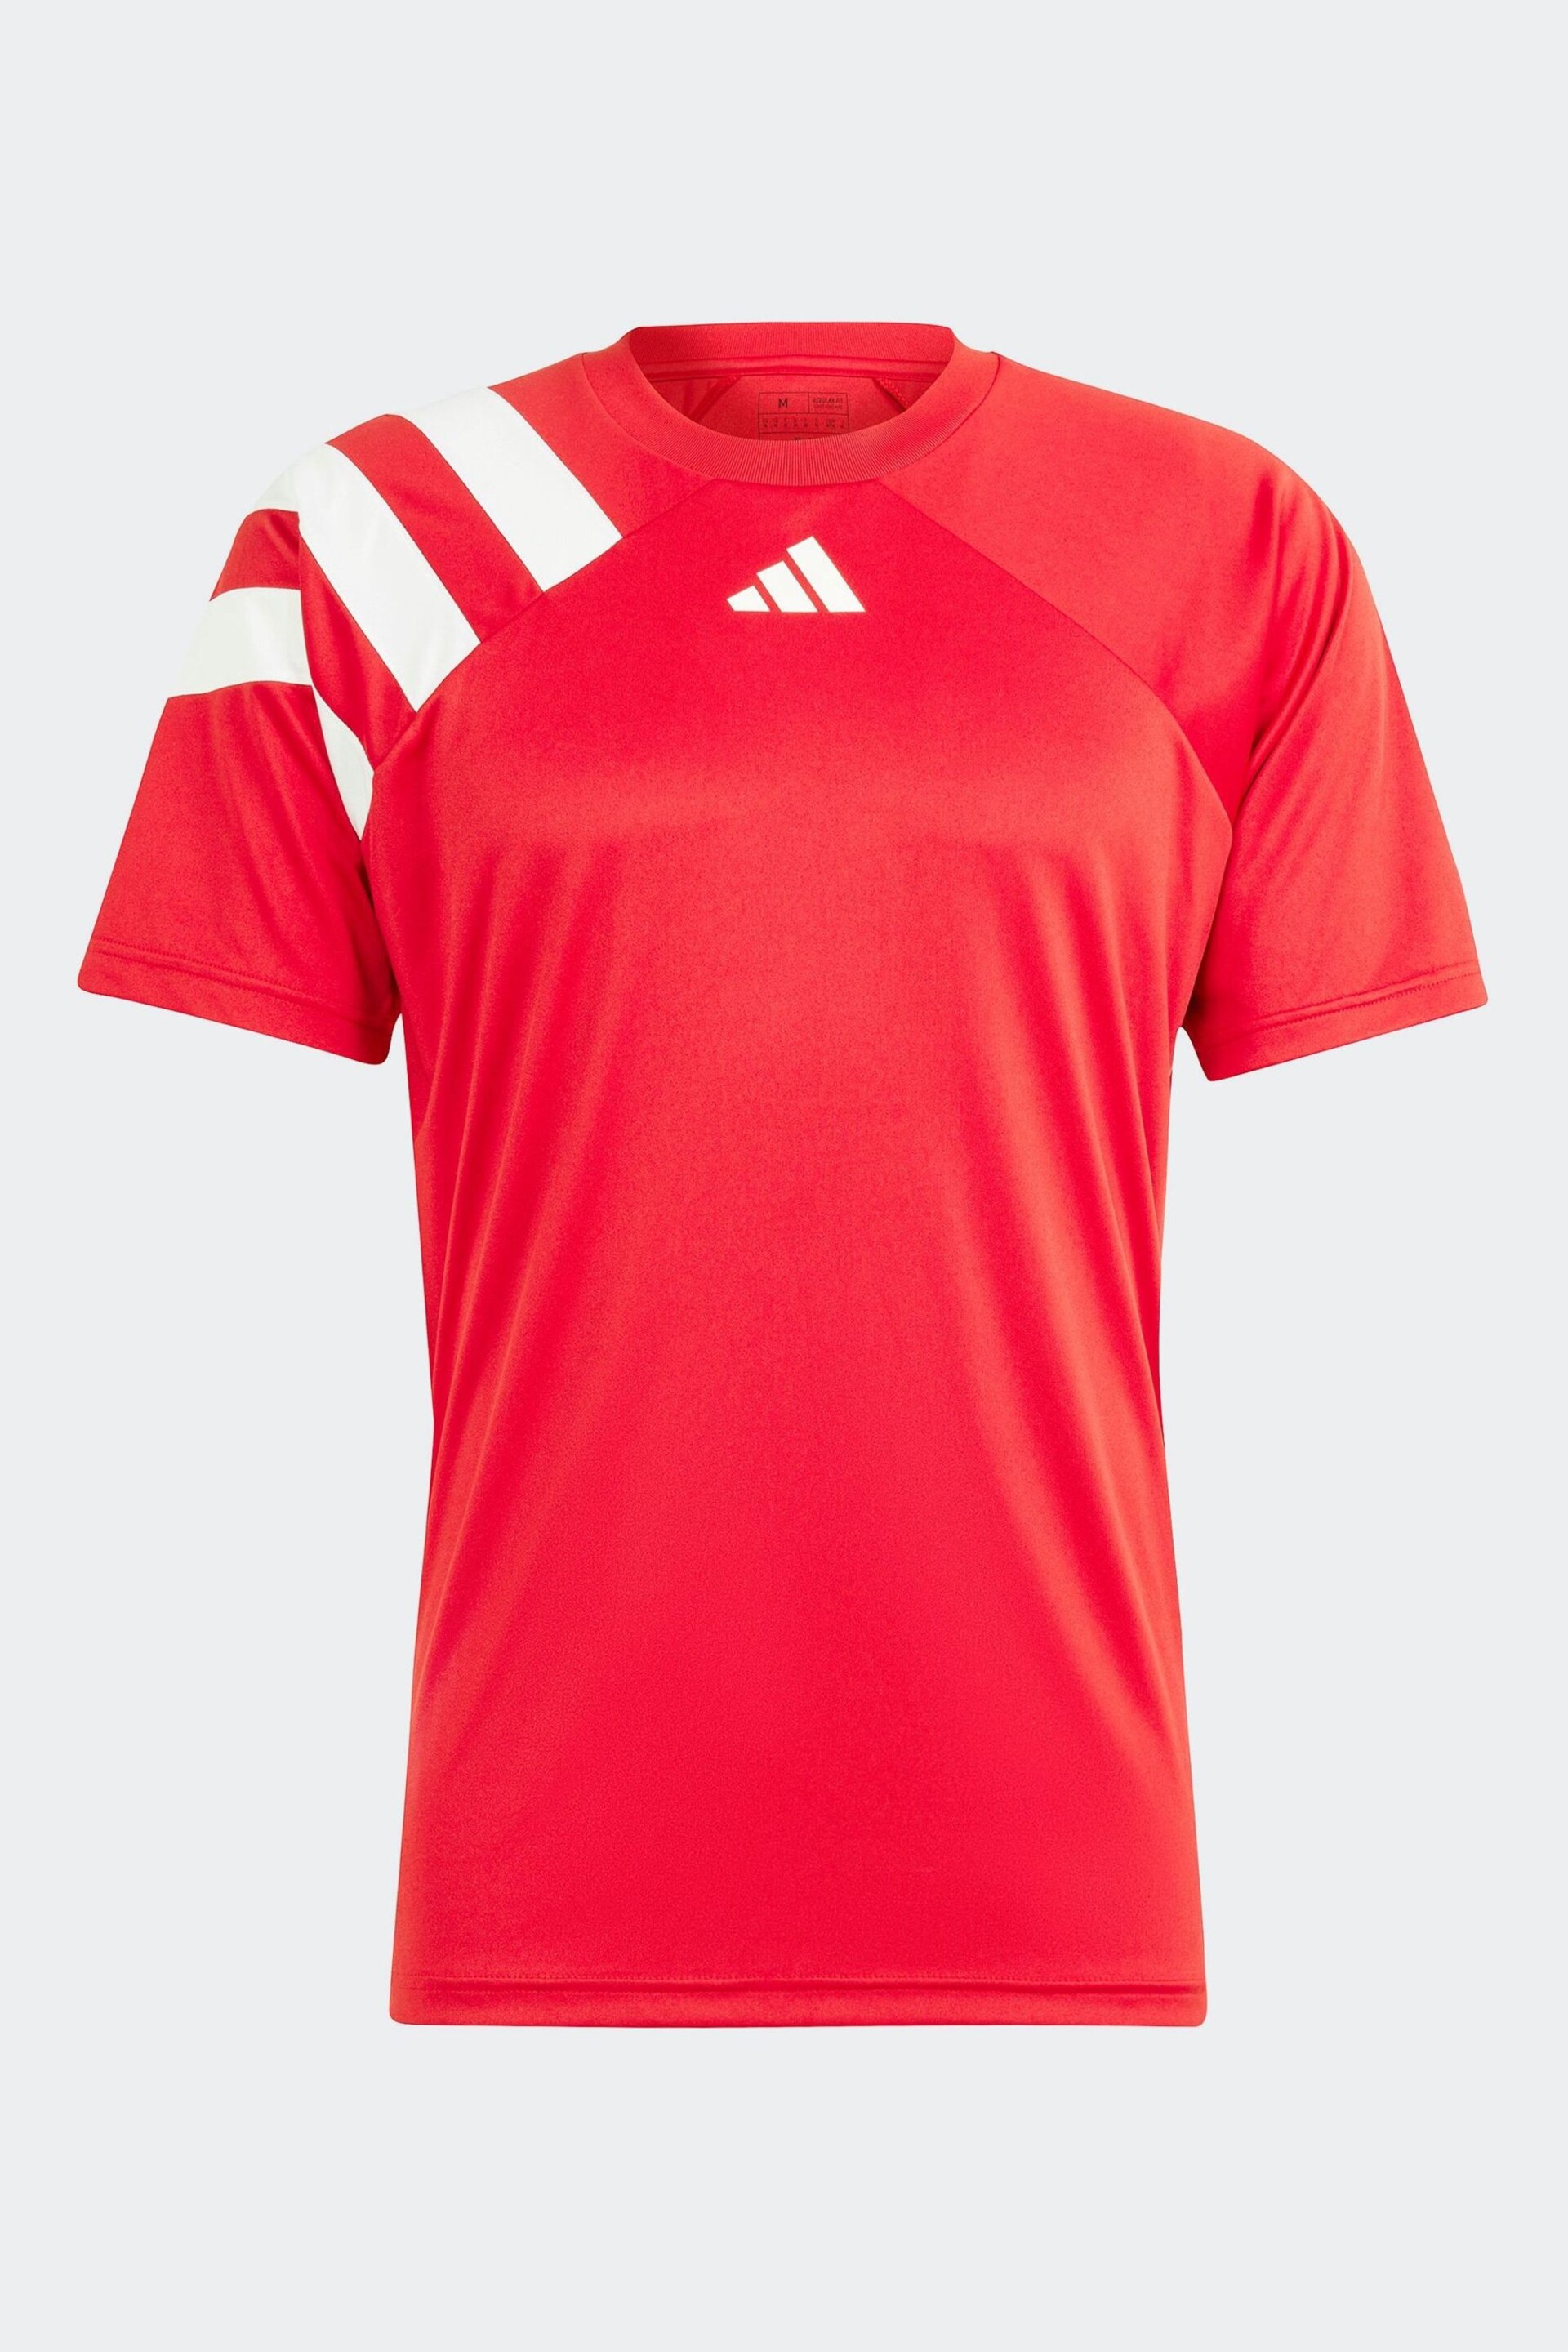 adidas Red Fortore 23 Jersey - Image 6 of 7